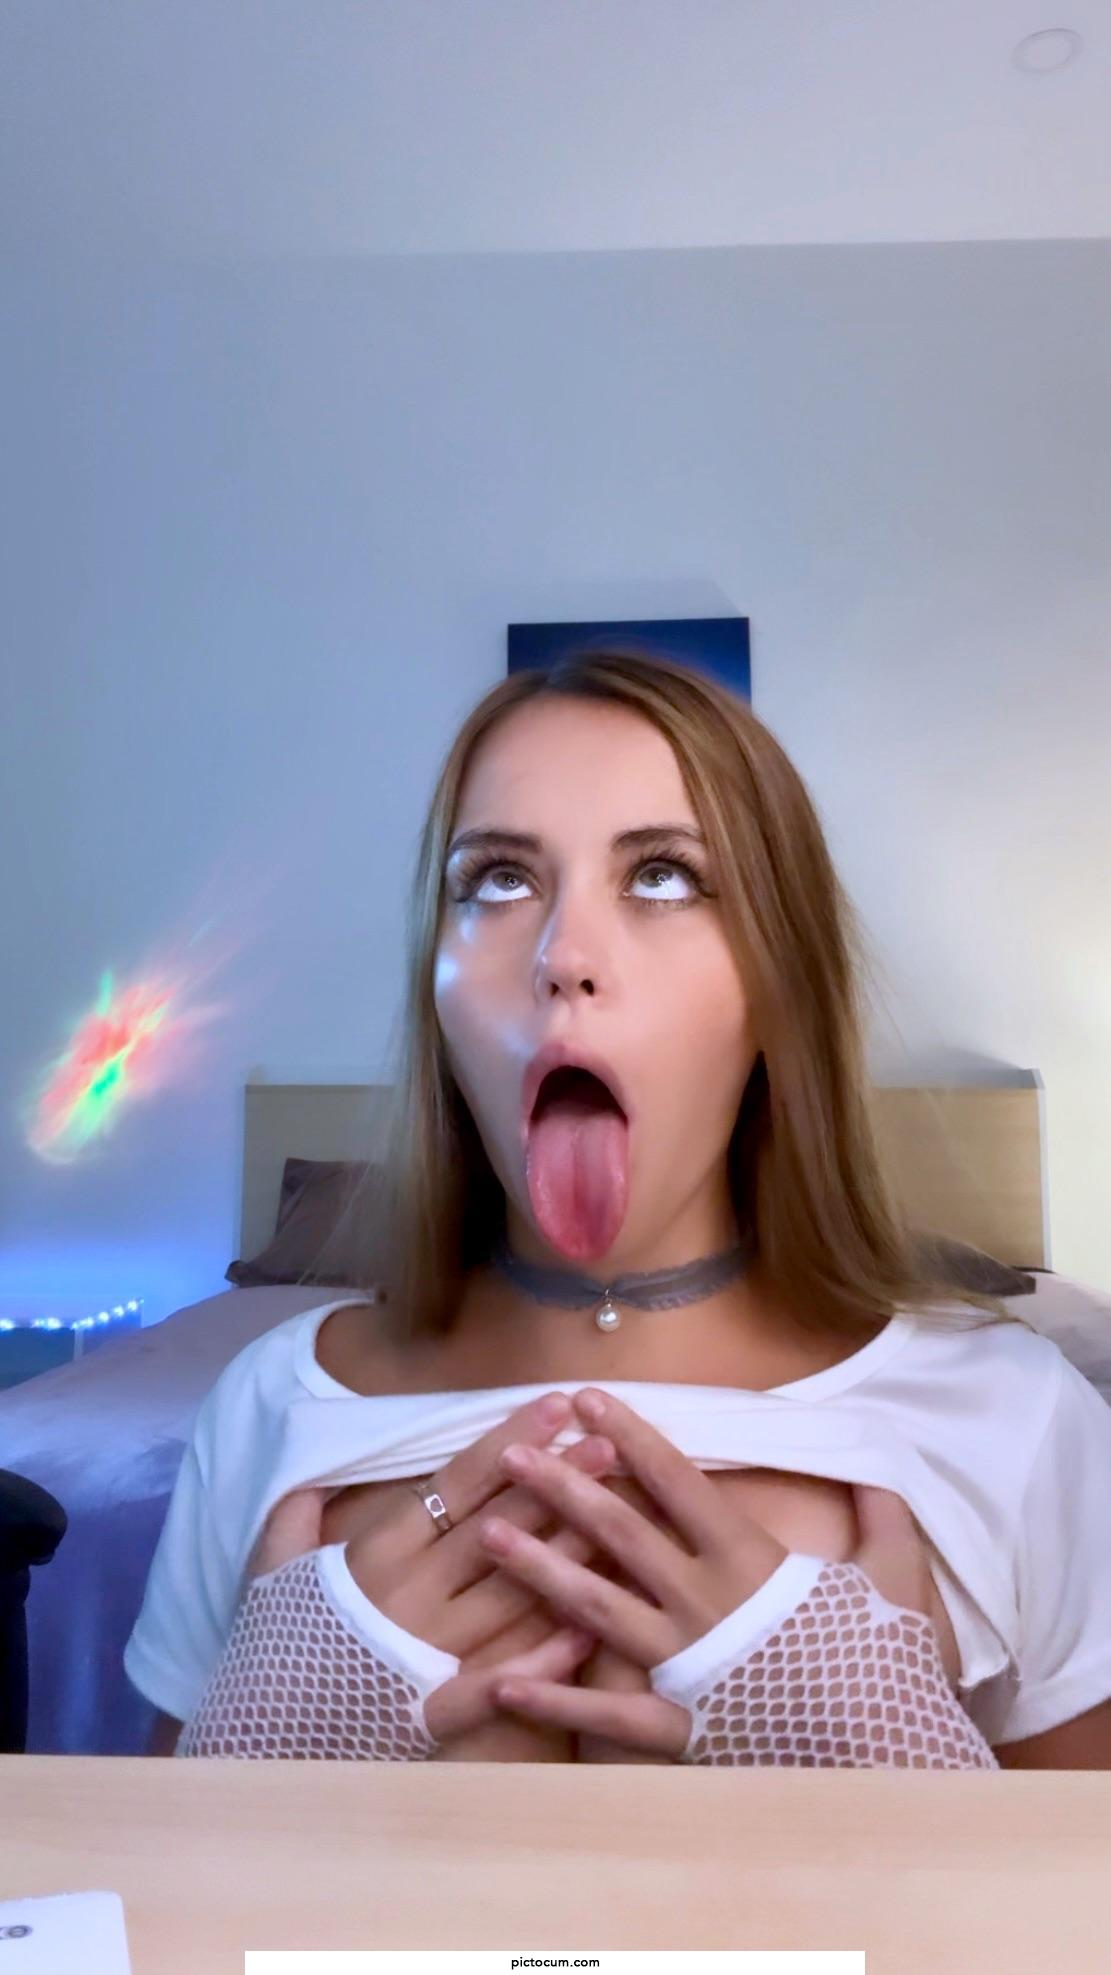 GREETINGS TO ALL SUBSCRIBERS SEXY AHEGAO 🤪